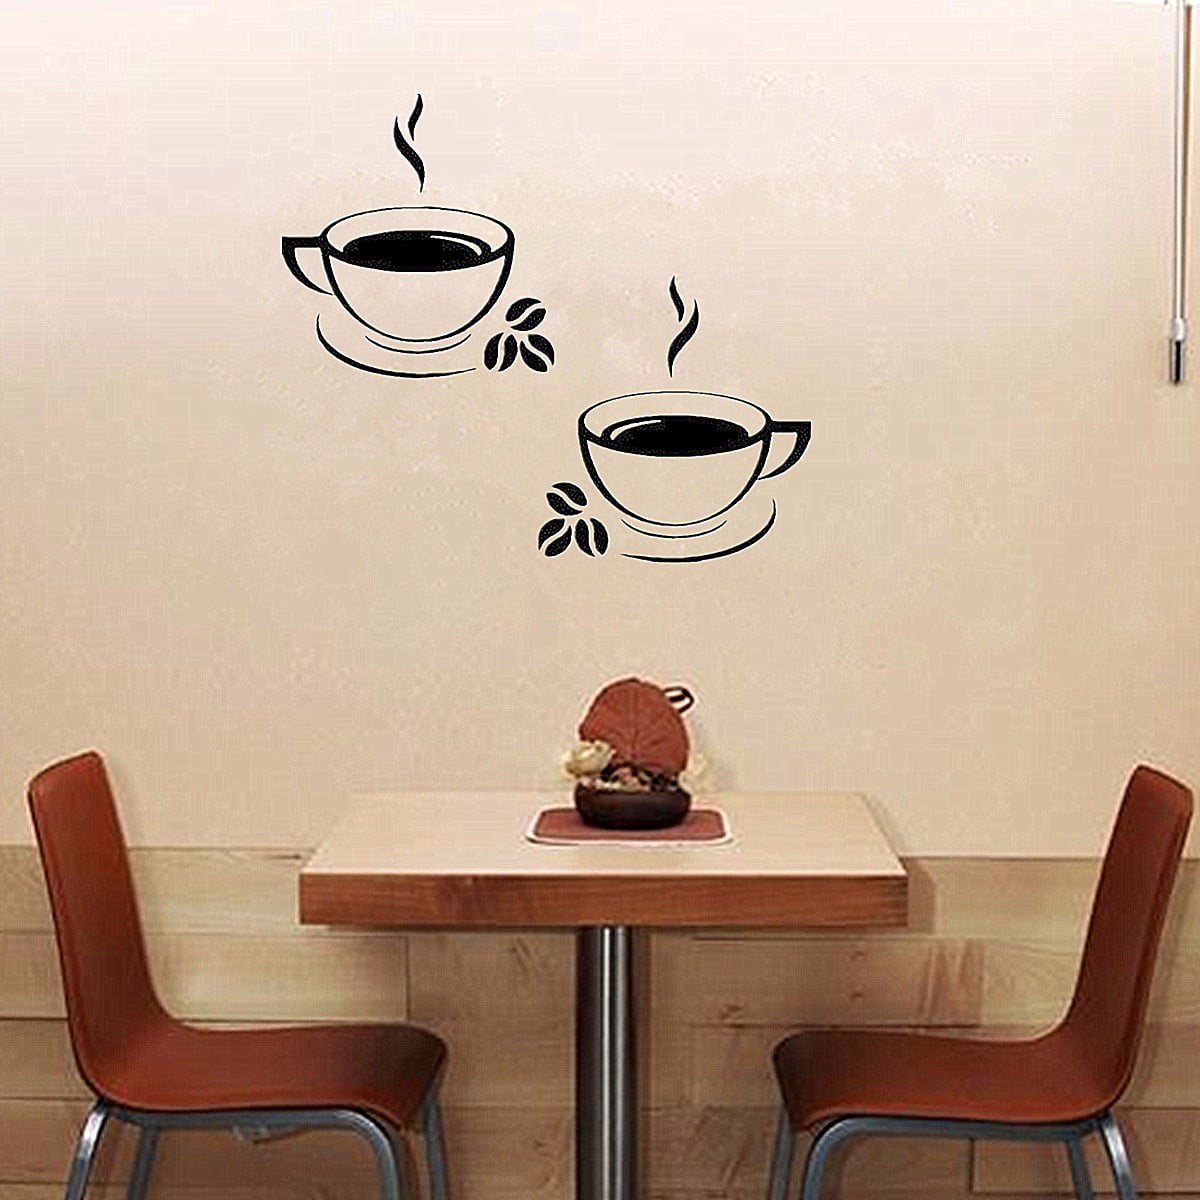 ig2687 Details about   Wall Decal Kitchen Coffee Cup Cafe Restaurant Vinyl Stikcers